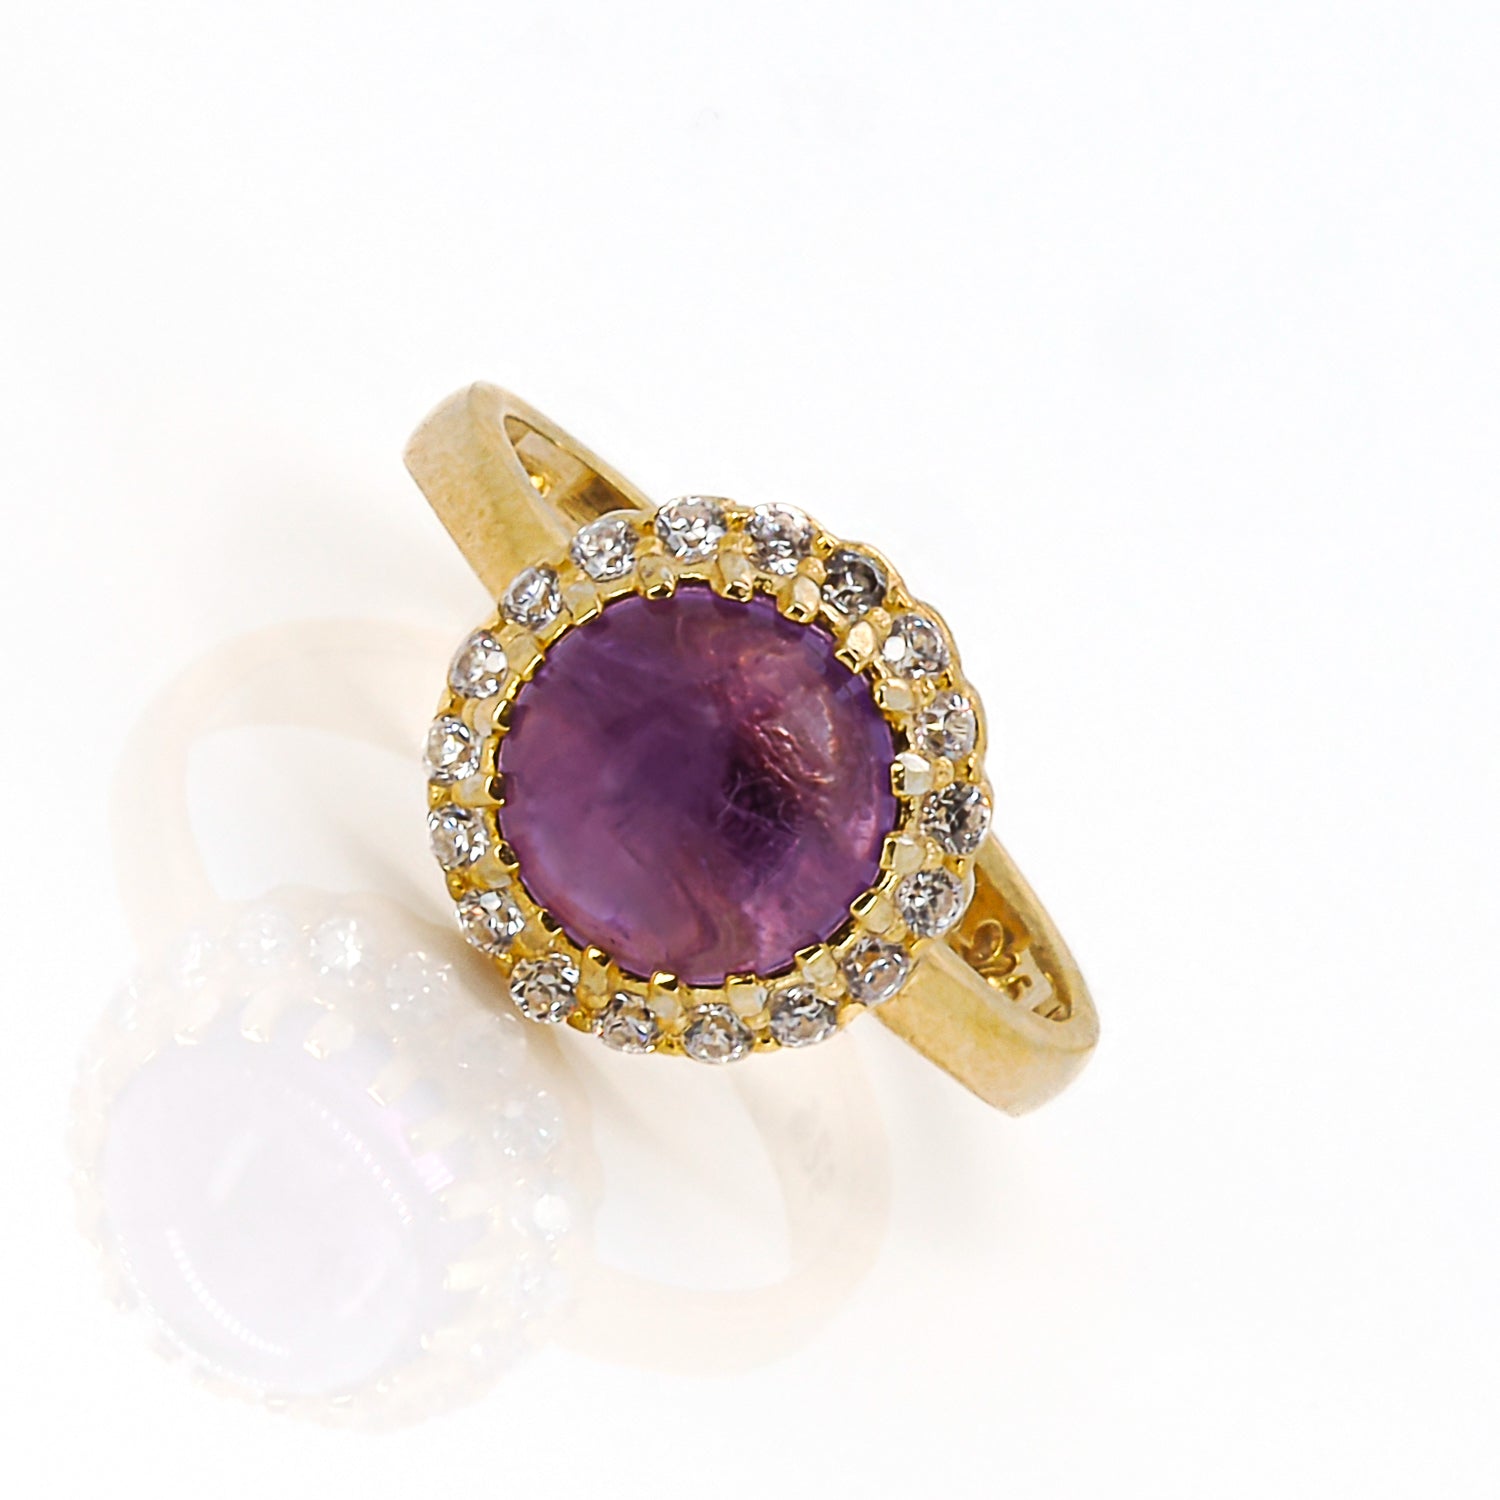 Elegant Amethyst Gemstone Ring with CZ Diamonds - Handcrafted with 24K Gold-Plated Finish.